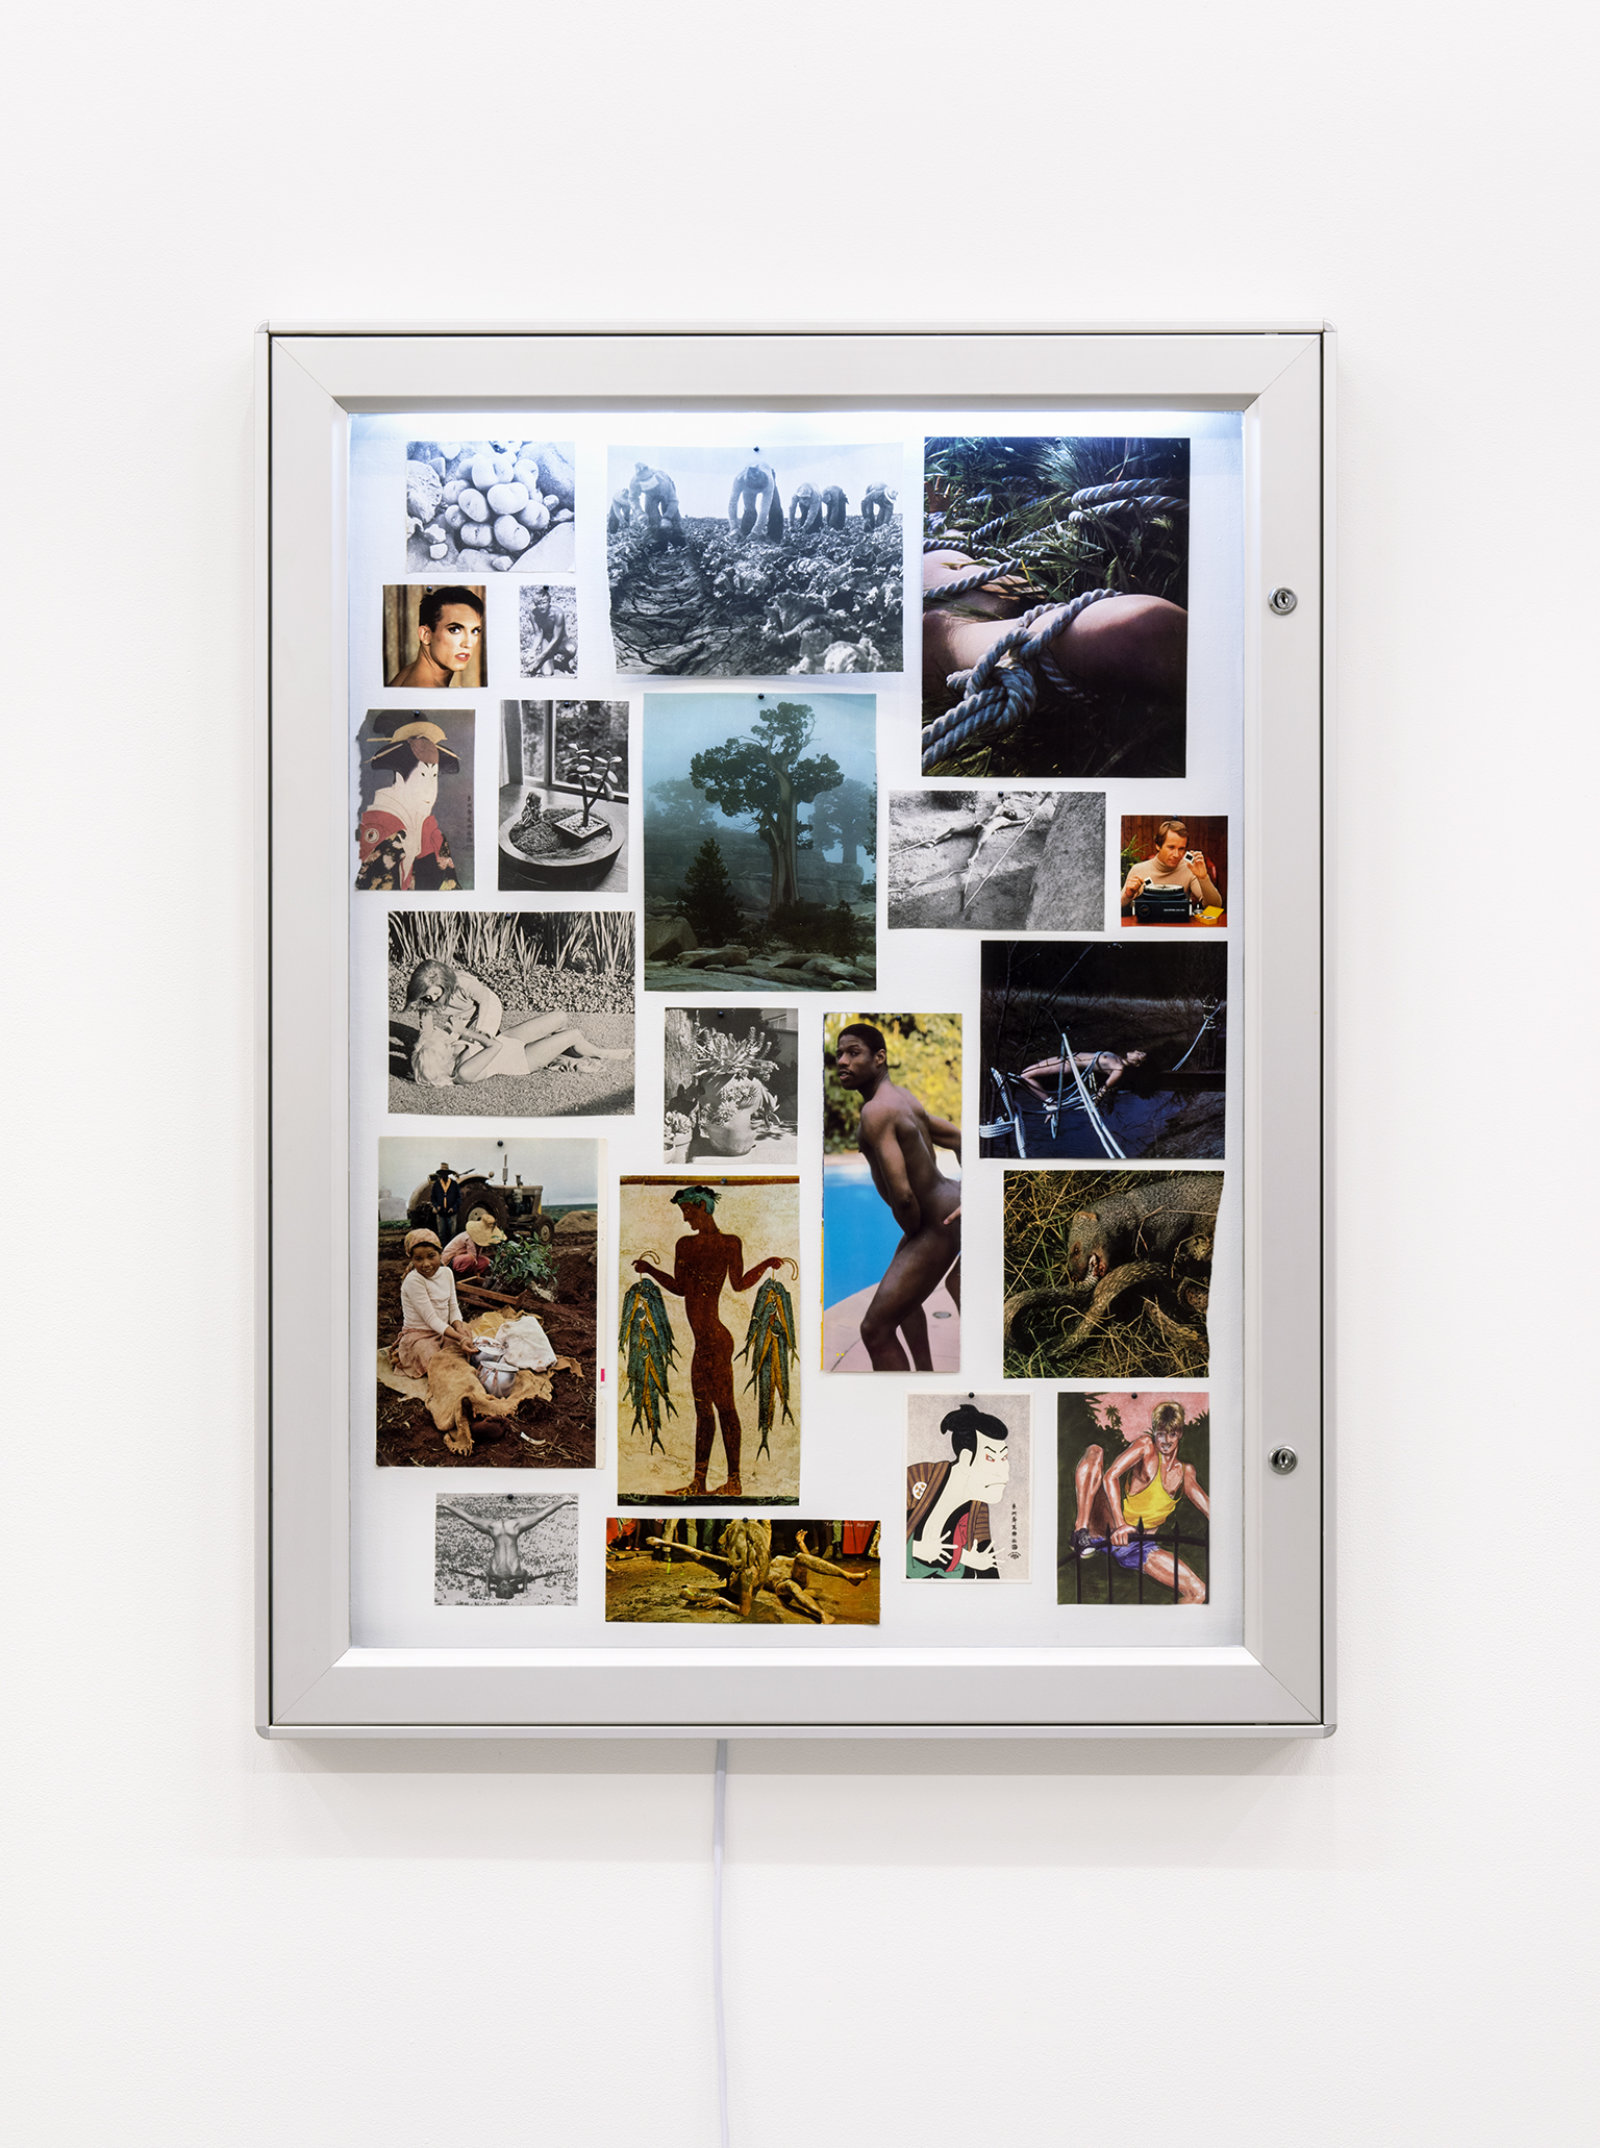 Geoffrey Farmer, Proof of an External World, 2011, display case, images cut from books and magazines, map tacks, 32 x 43 x 2 in. (82 x 108 x 5 cm)